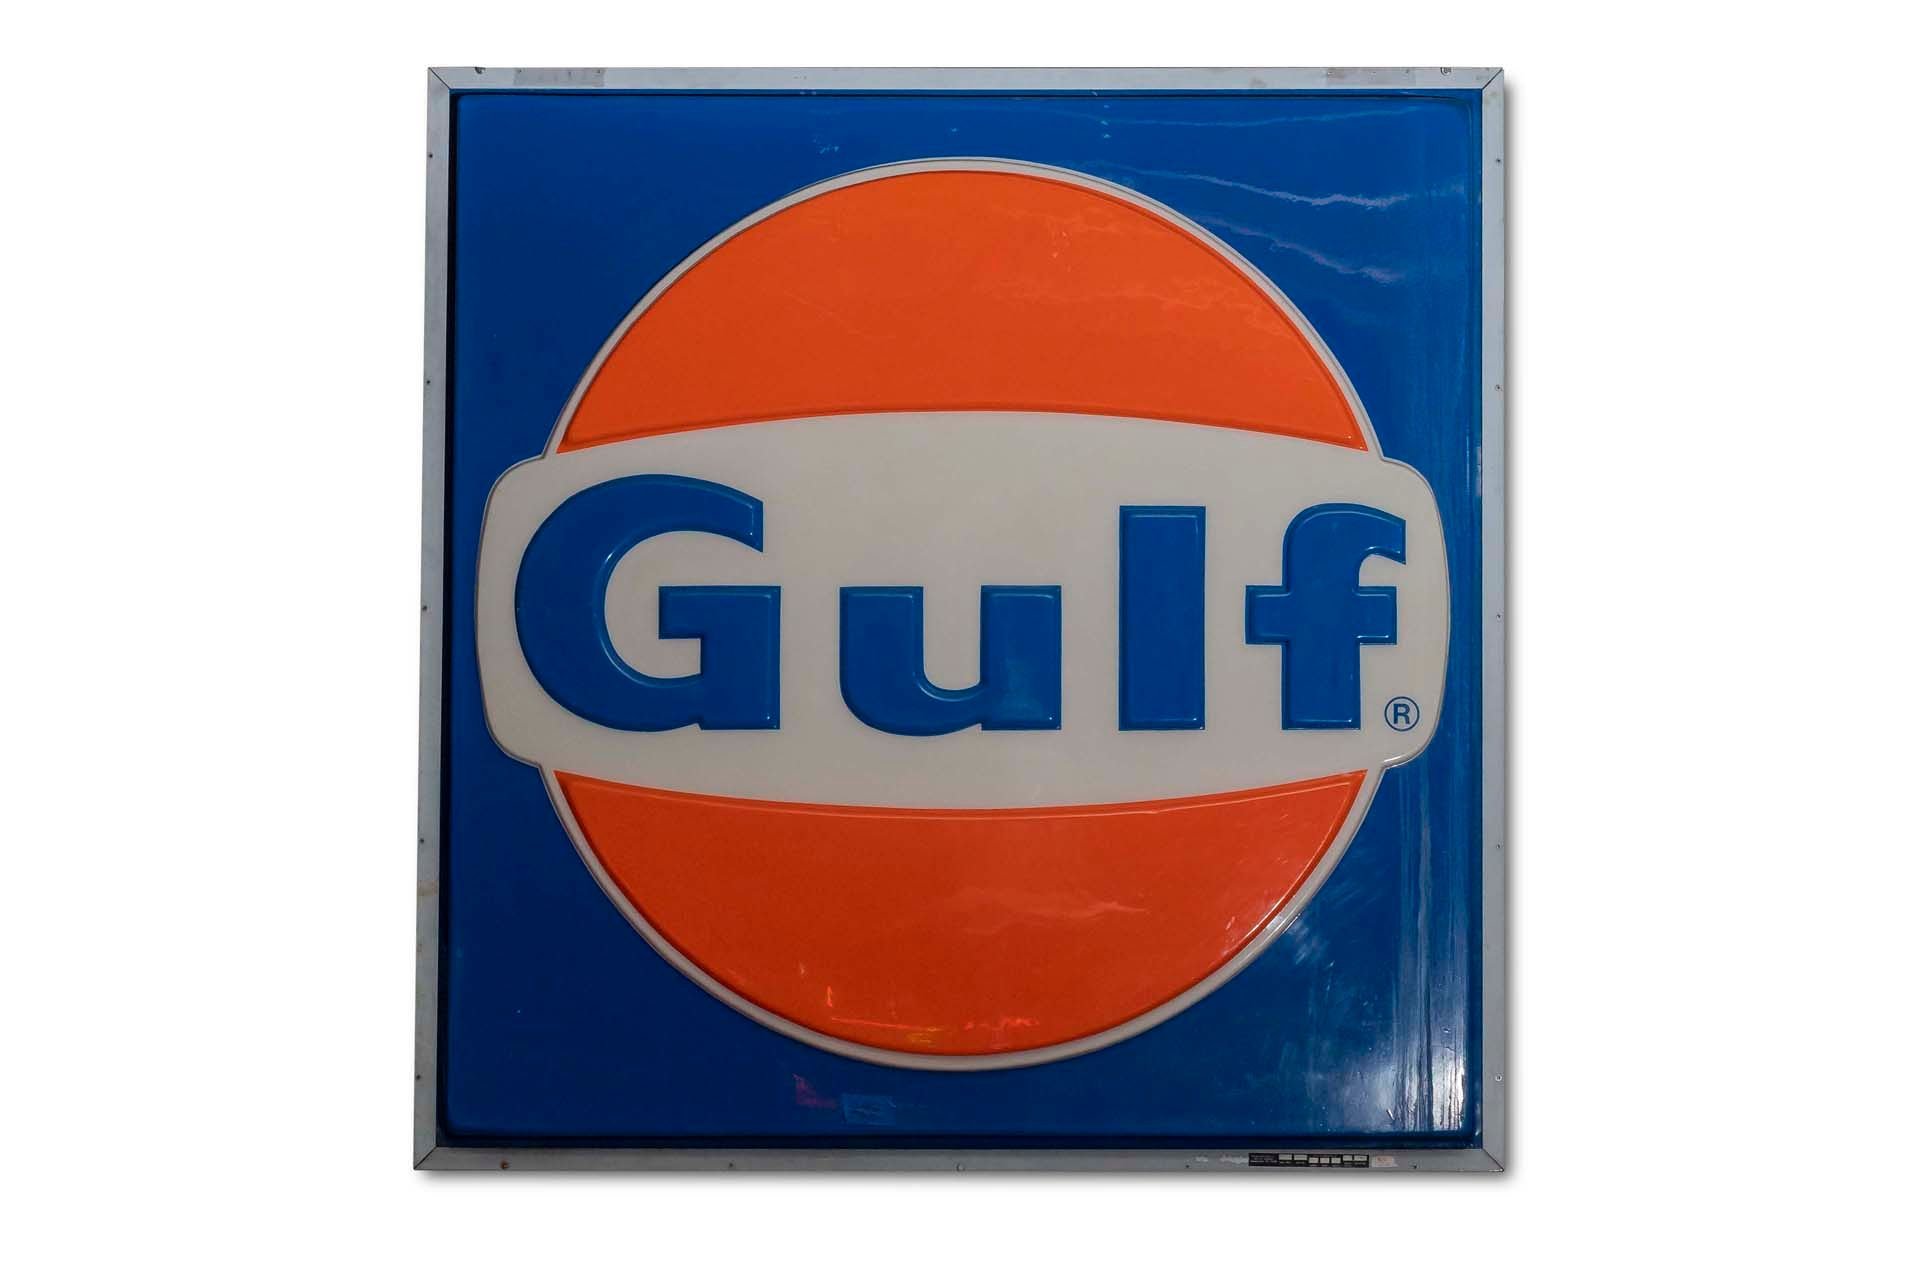 For Sale Large 'Gulf' Sign, Square